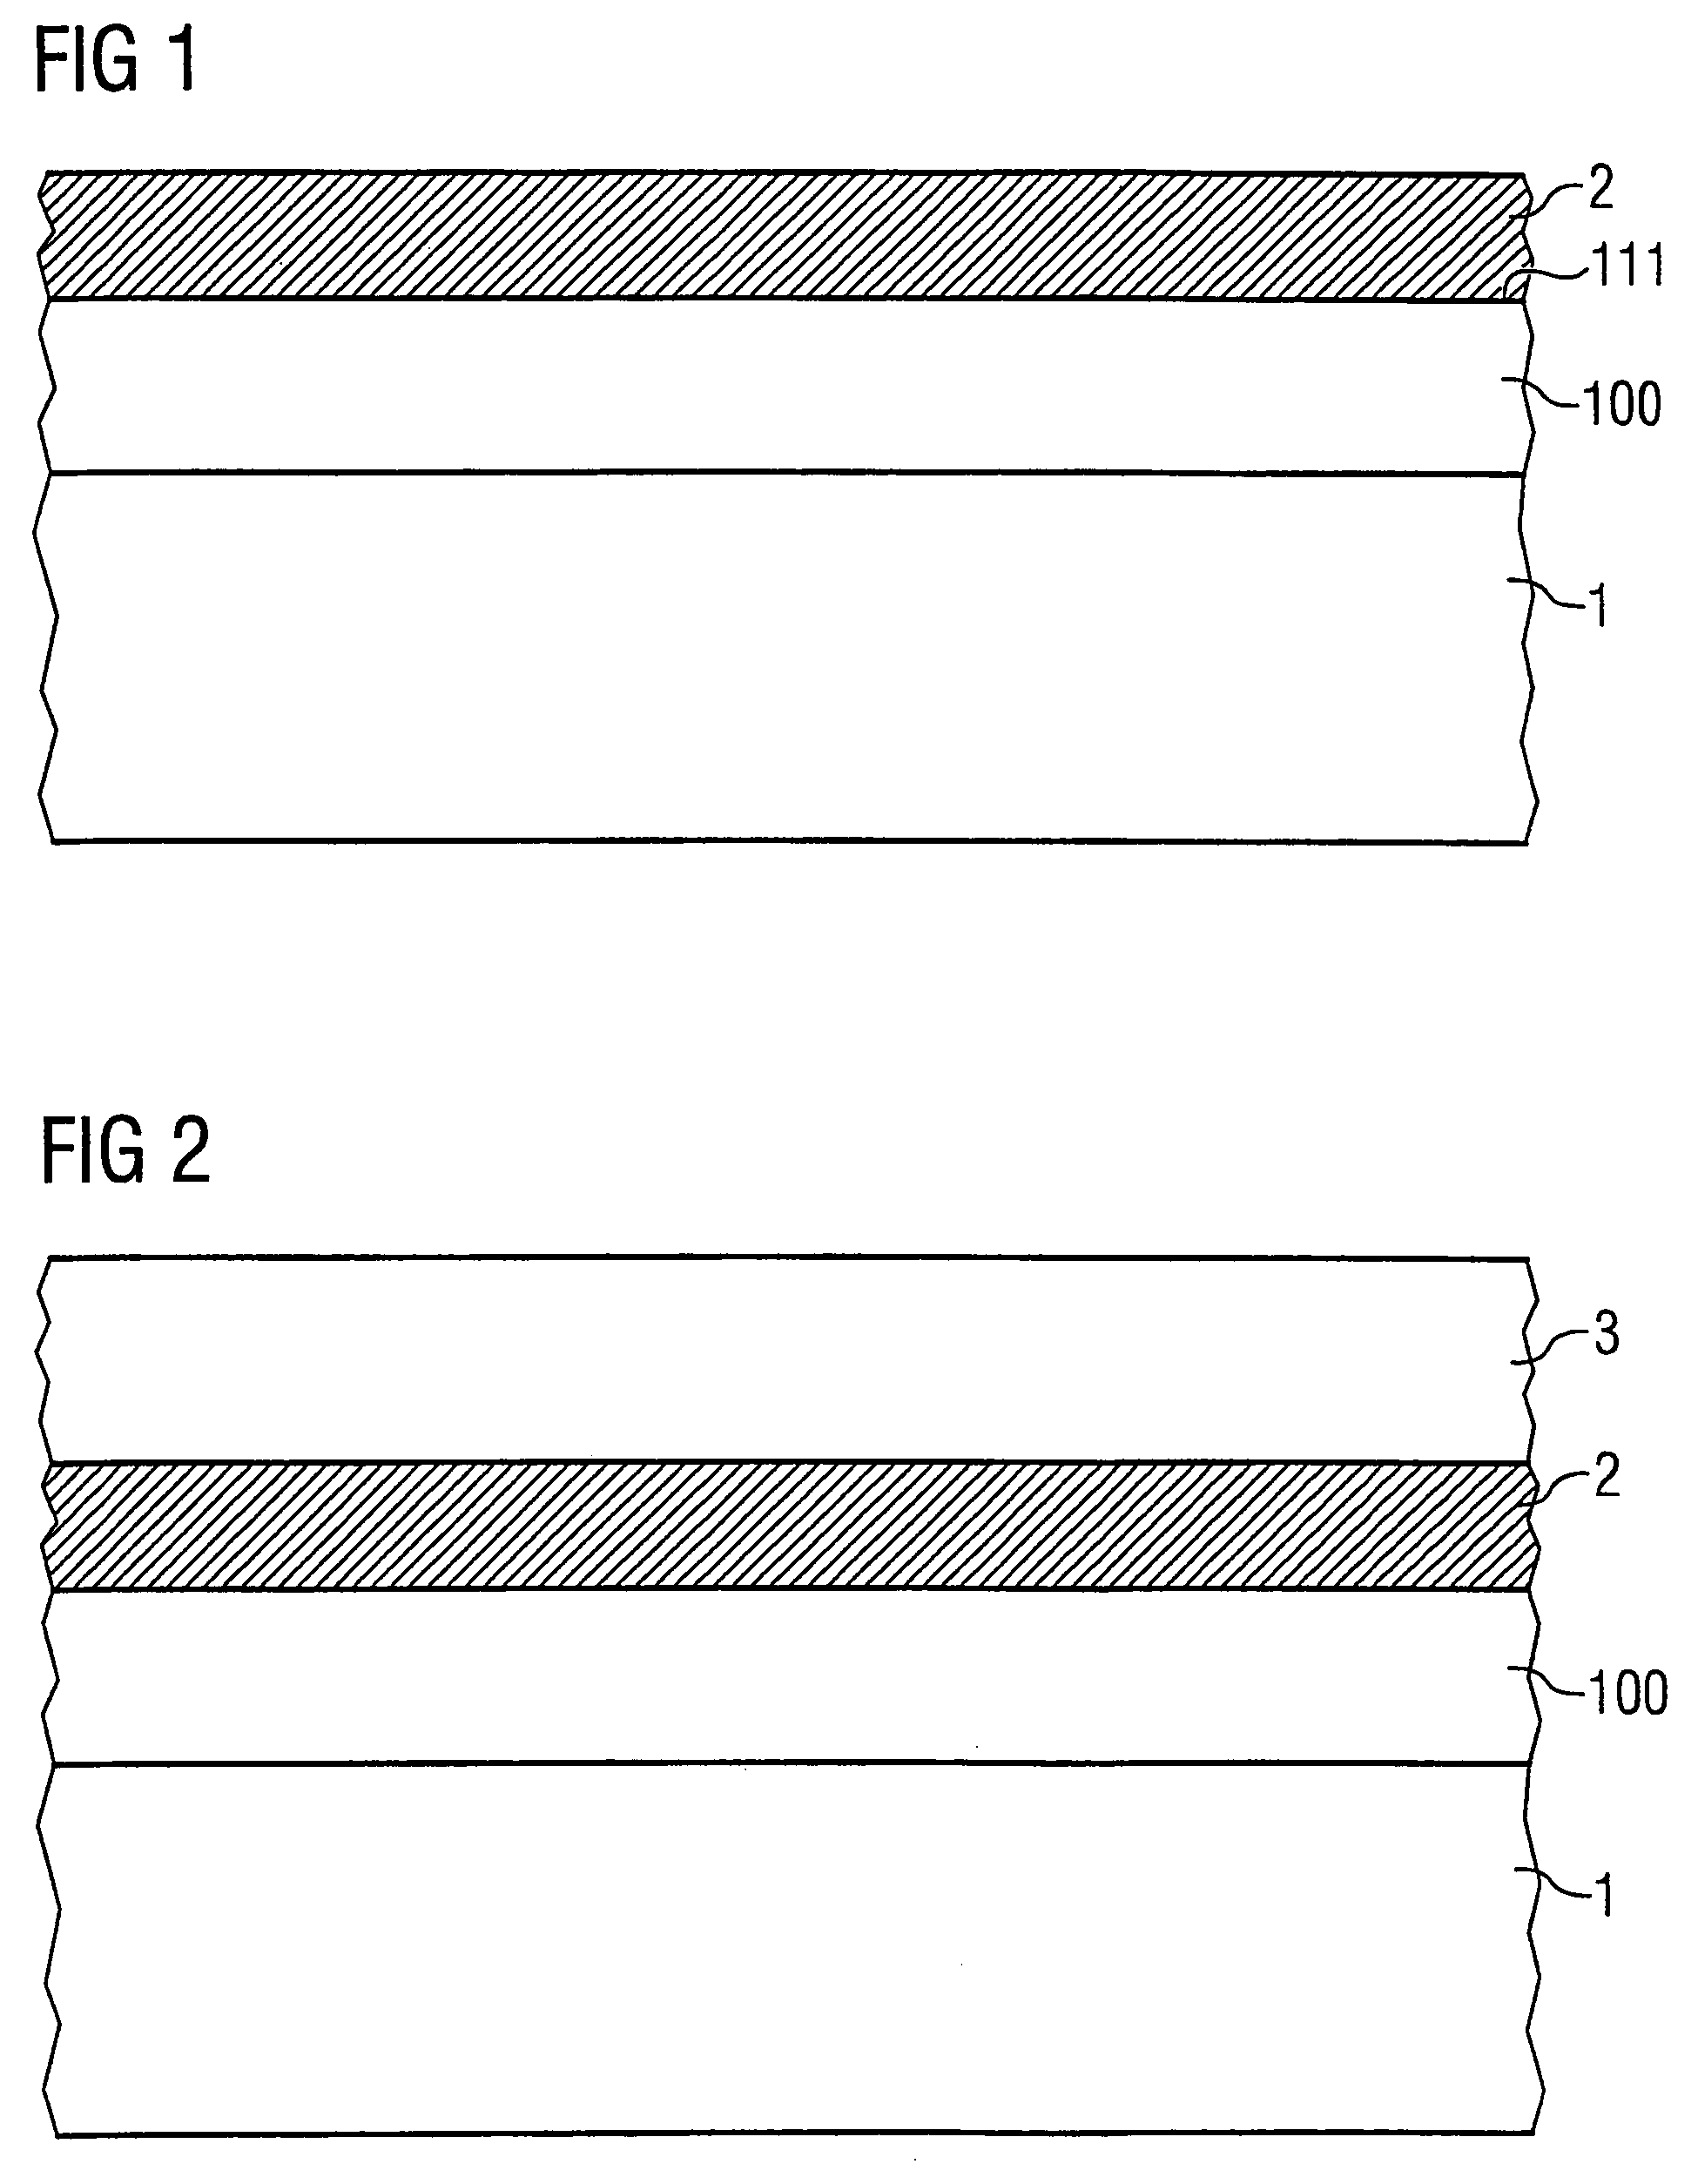 Semiconductor device and method of producing a semiconductor device